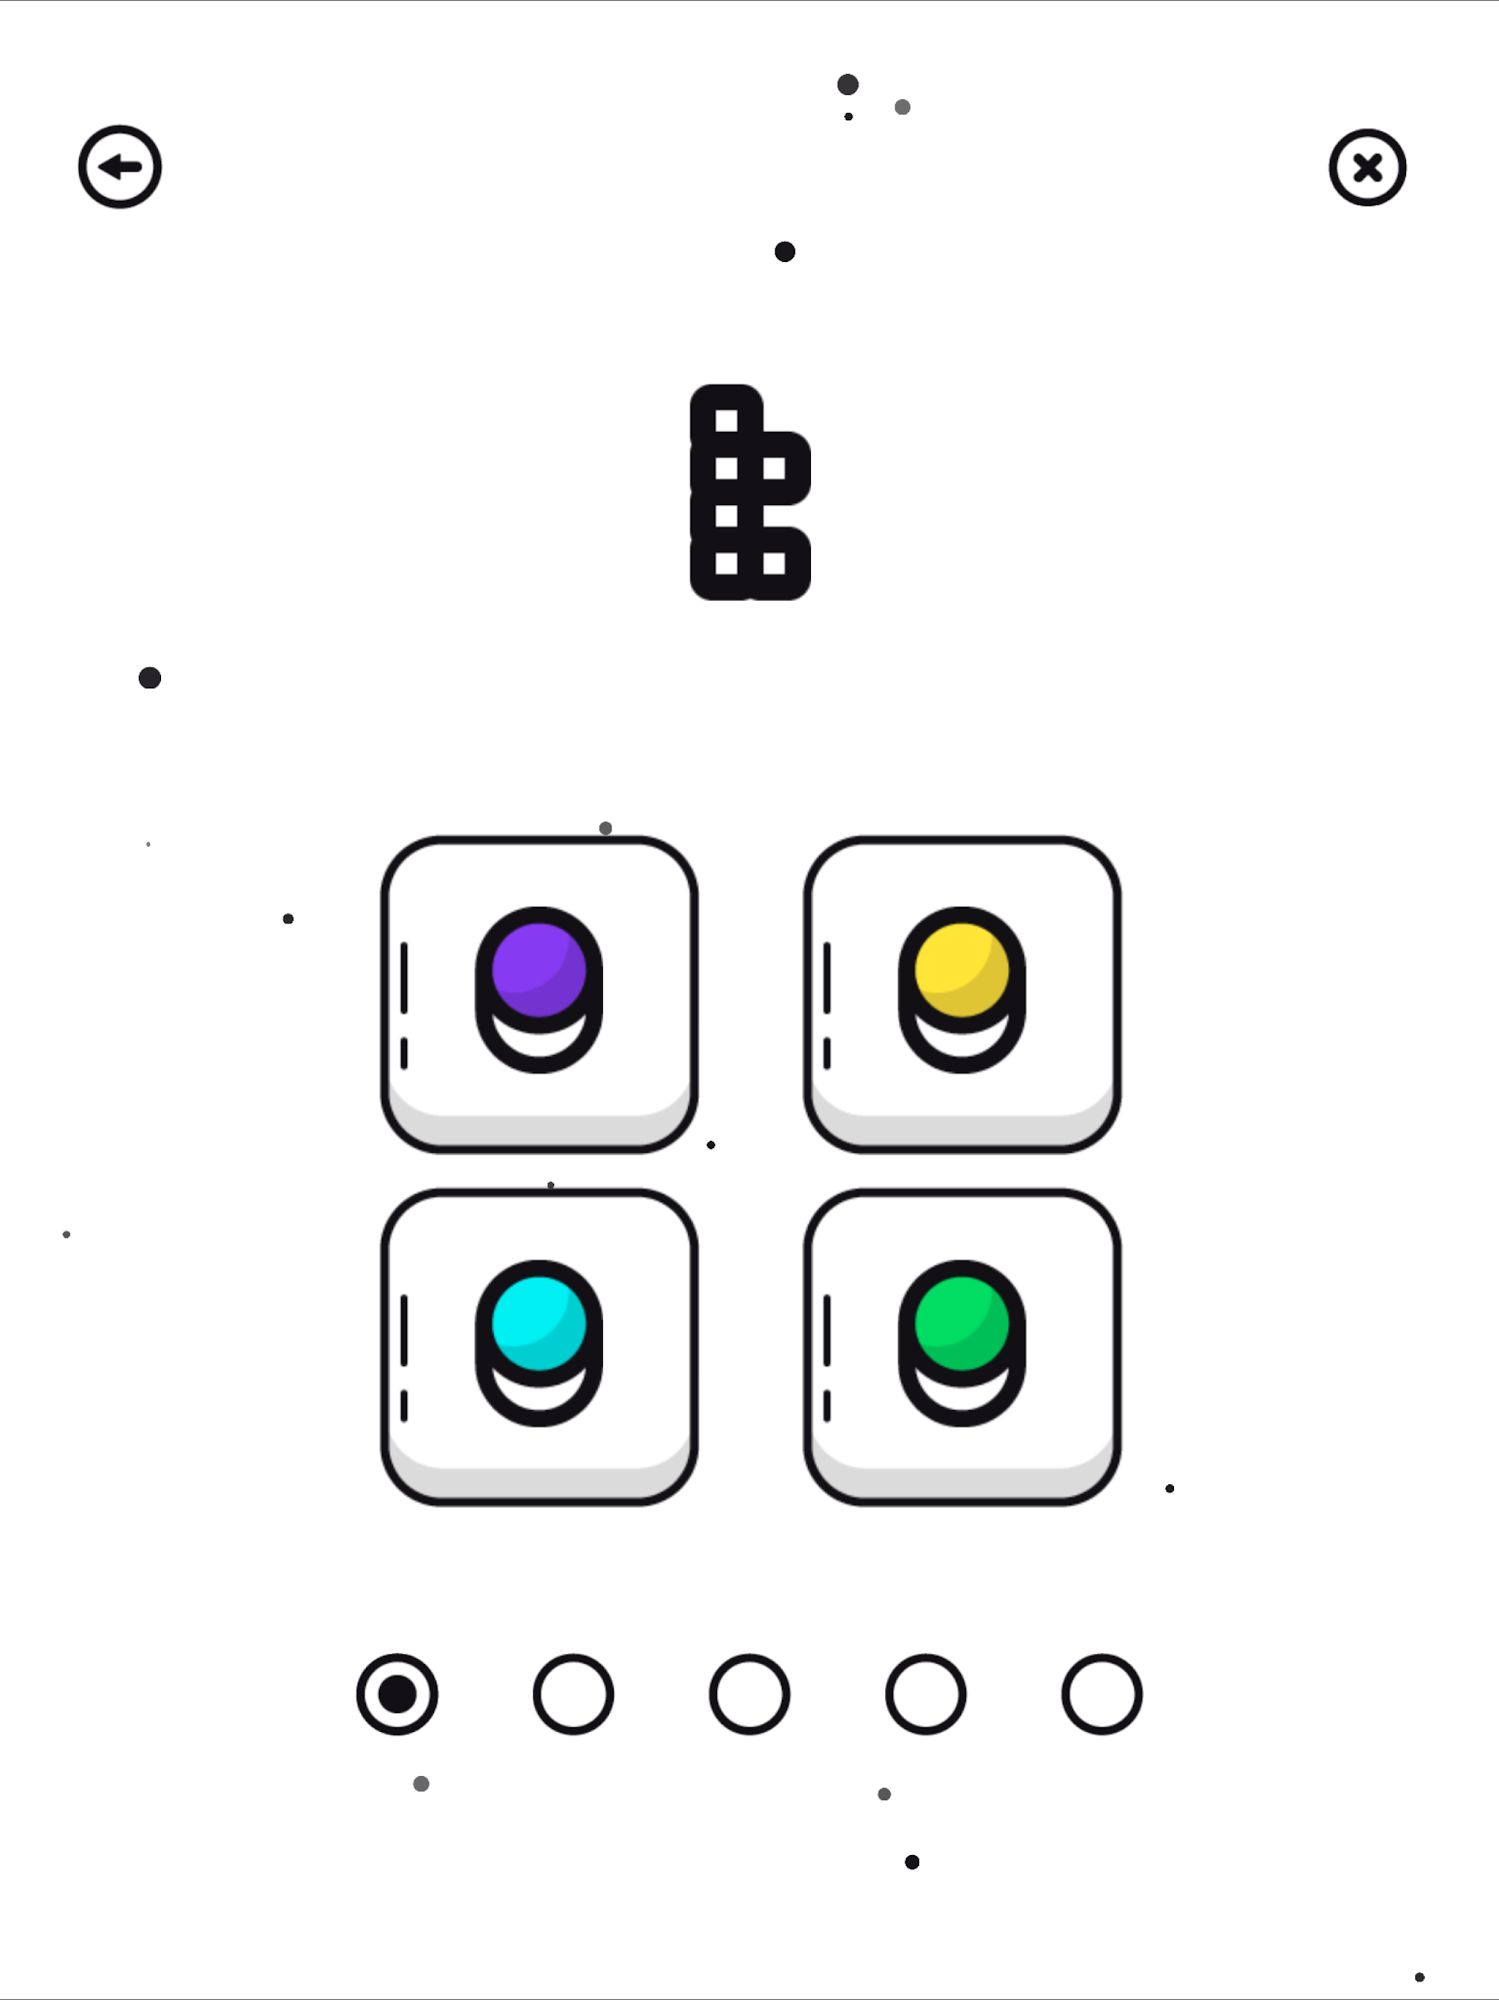 Cessabit: a memory game - Android game screenshots.